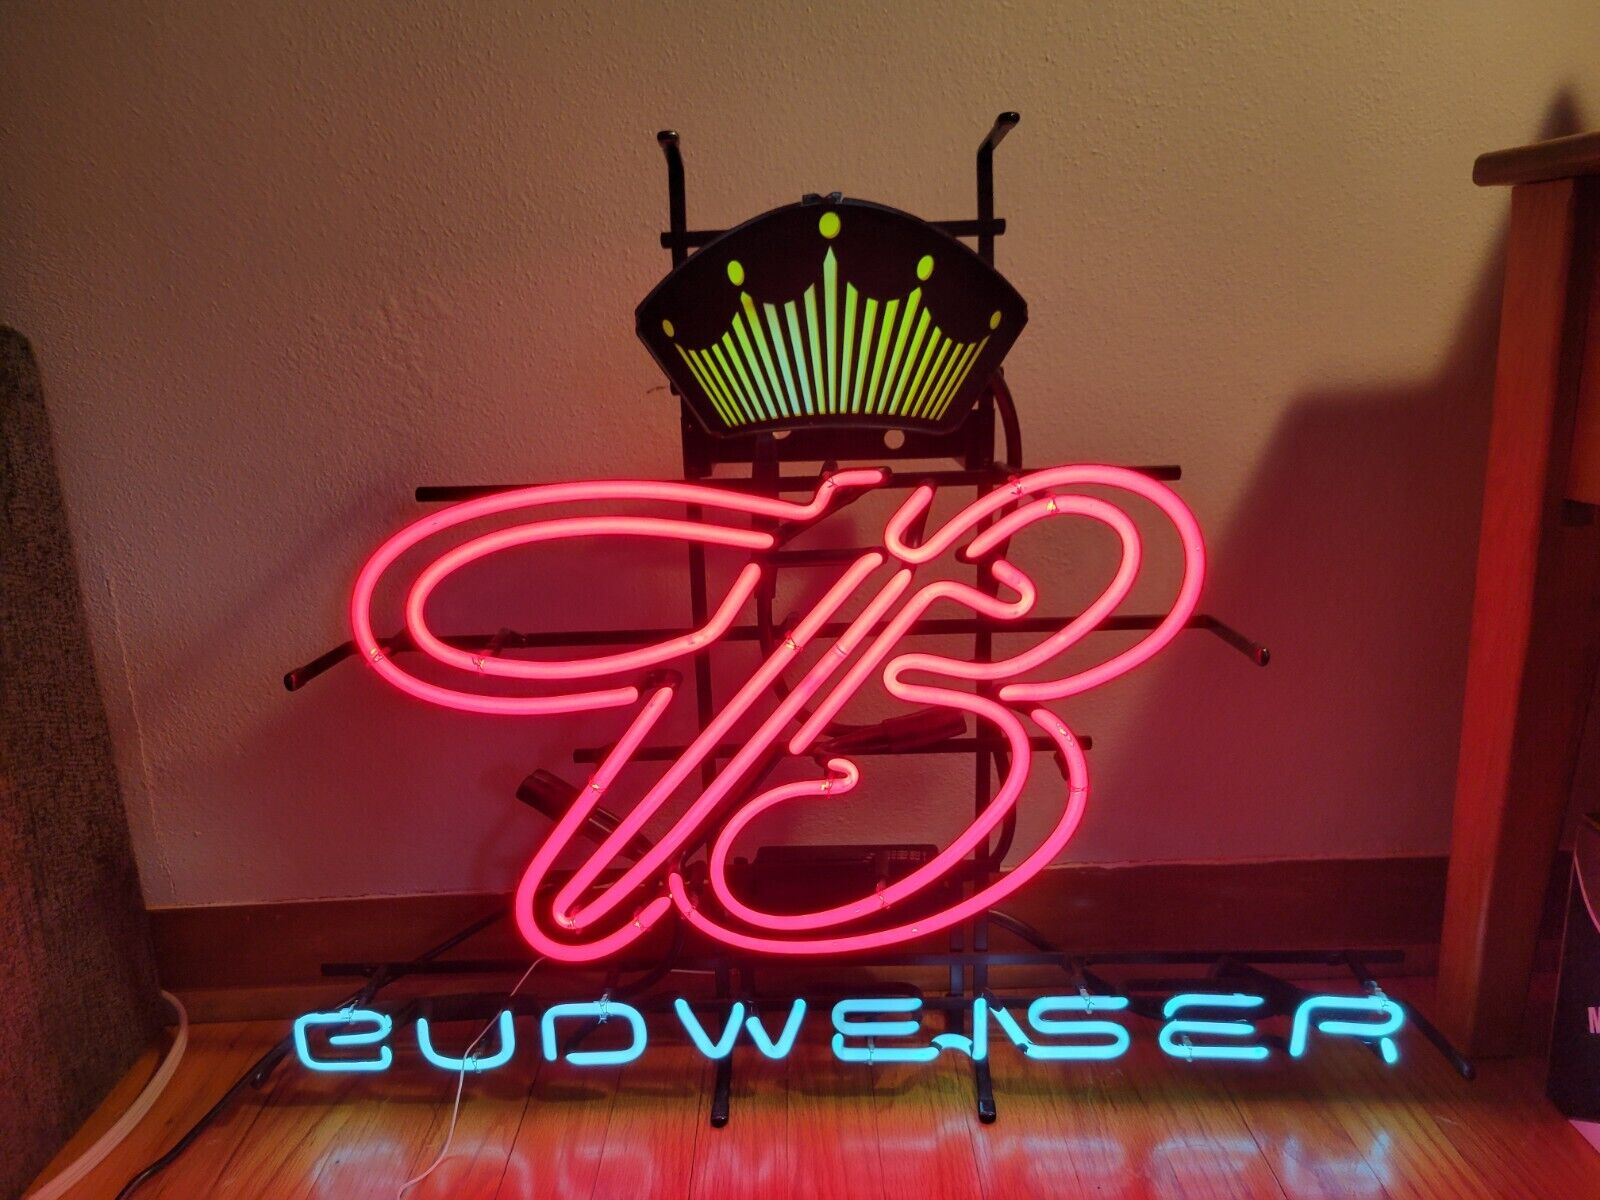 Budweiser Glass Tube Neon Sign King of beers Rare